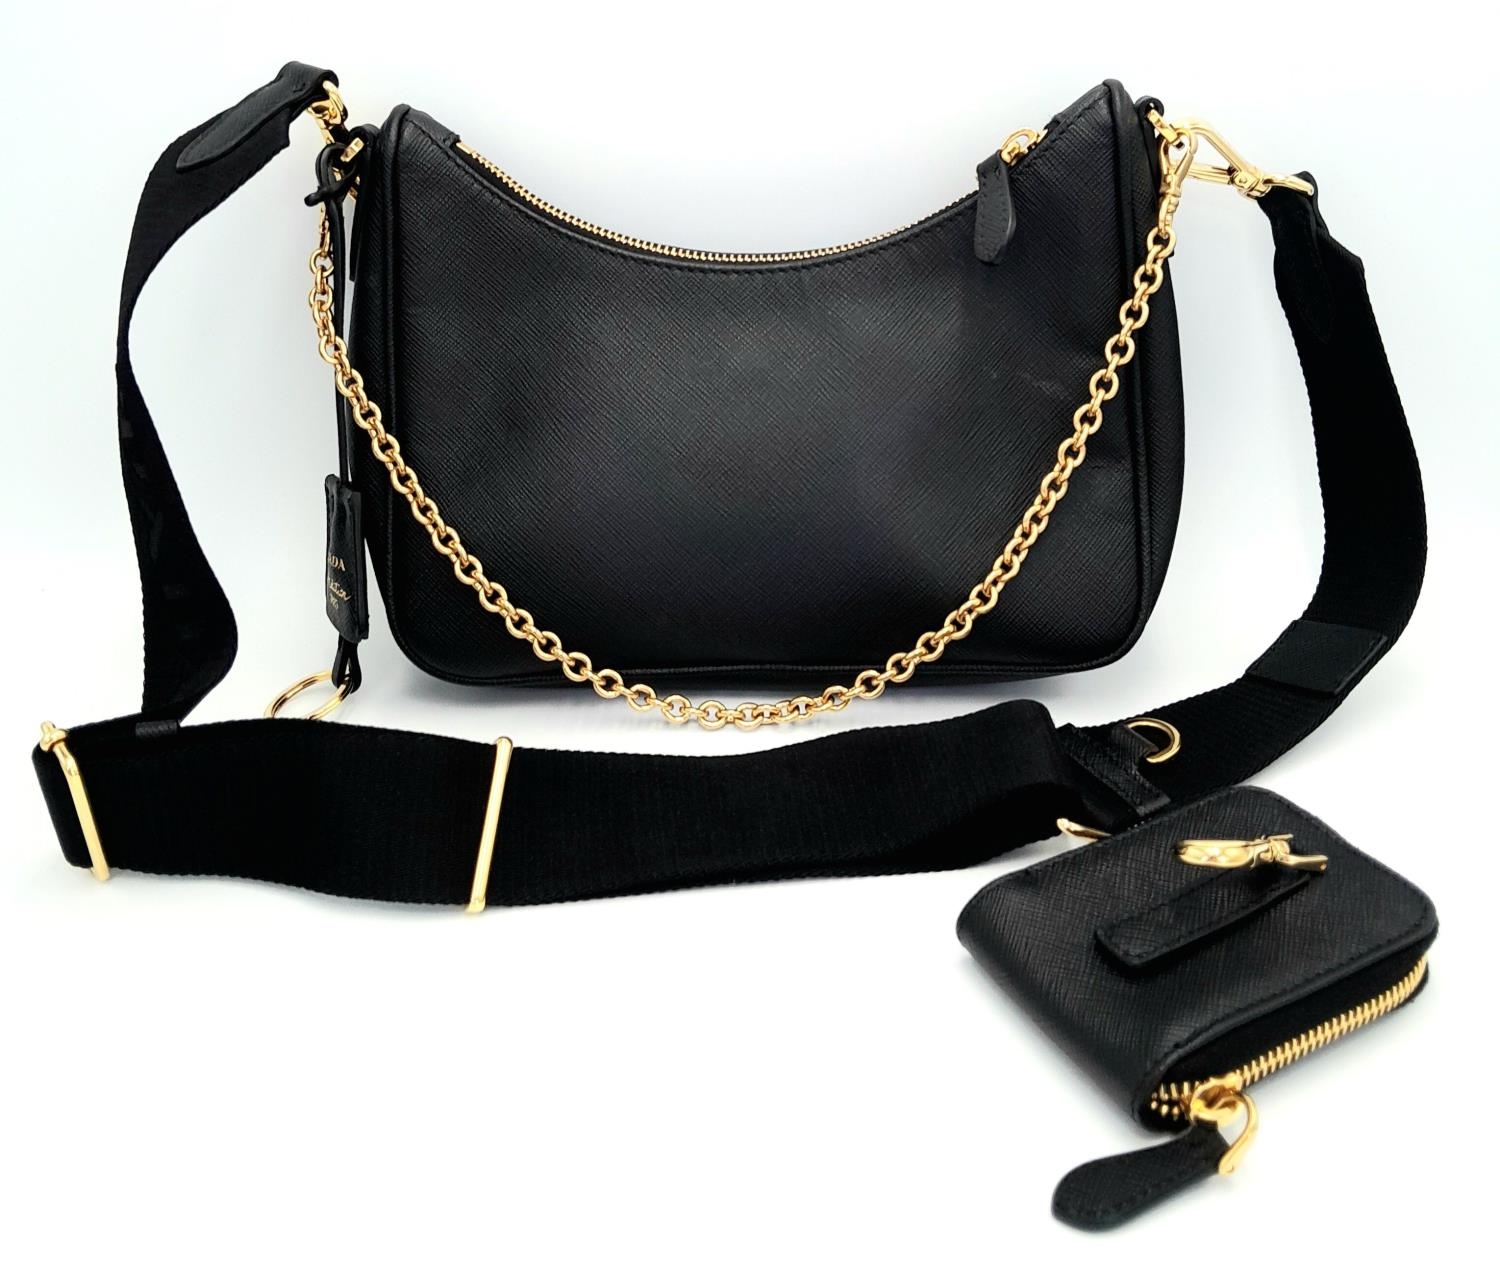 A Prada Black Re-Edition 2005 Bag. Saffiano leather exterior with gold-toned hardware, zip top - Image 2 of 15